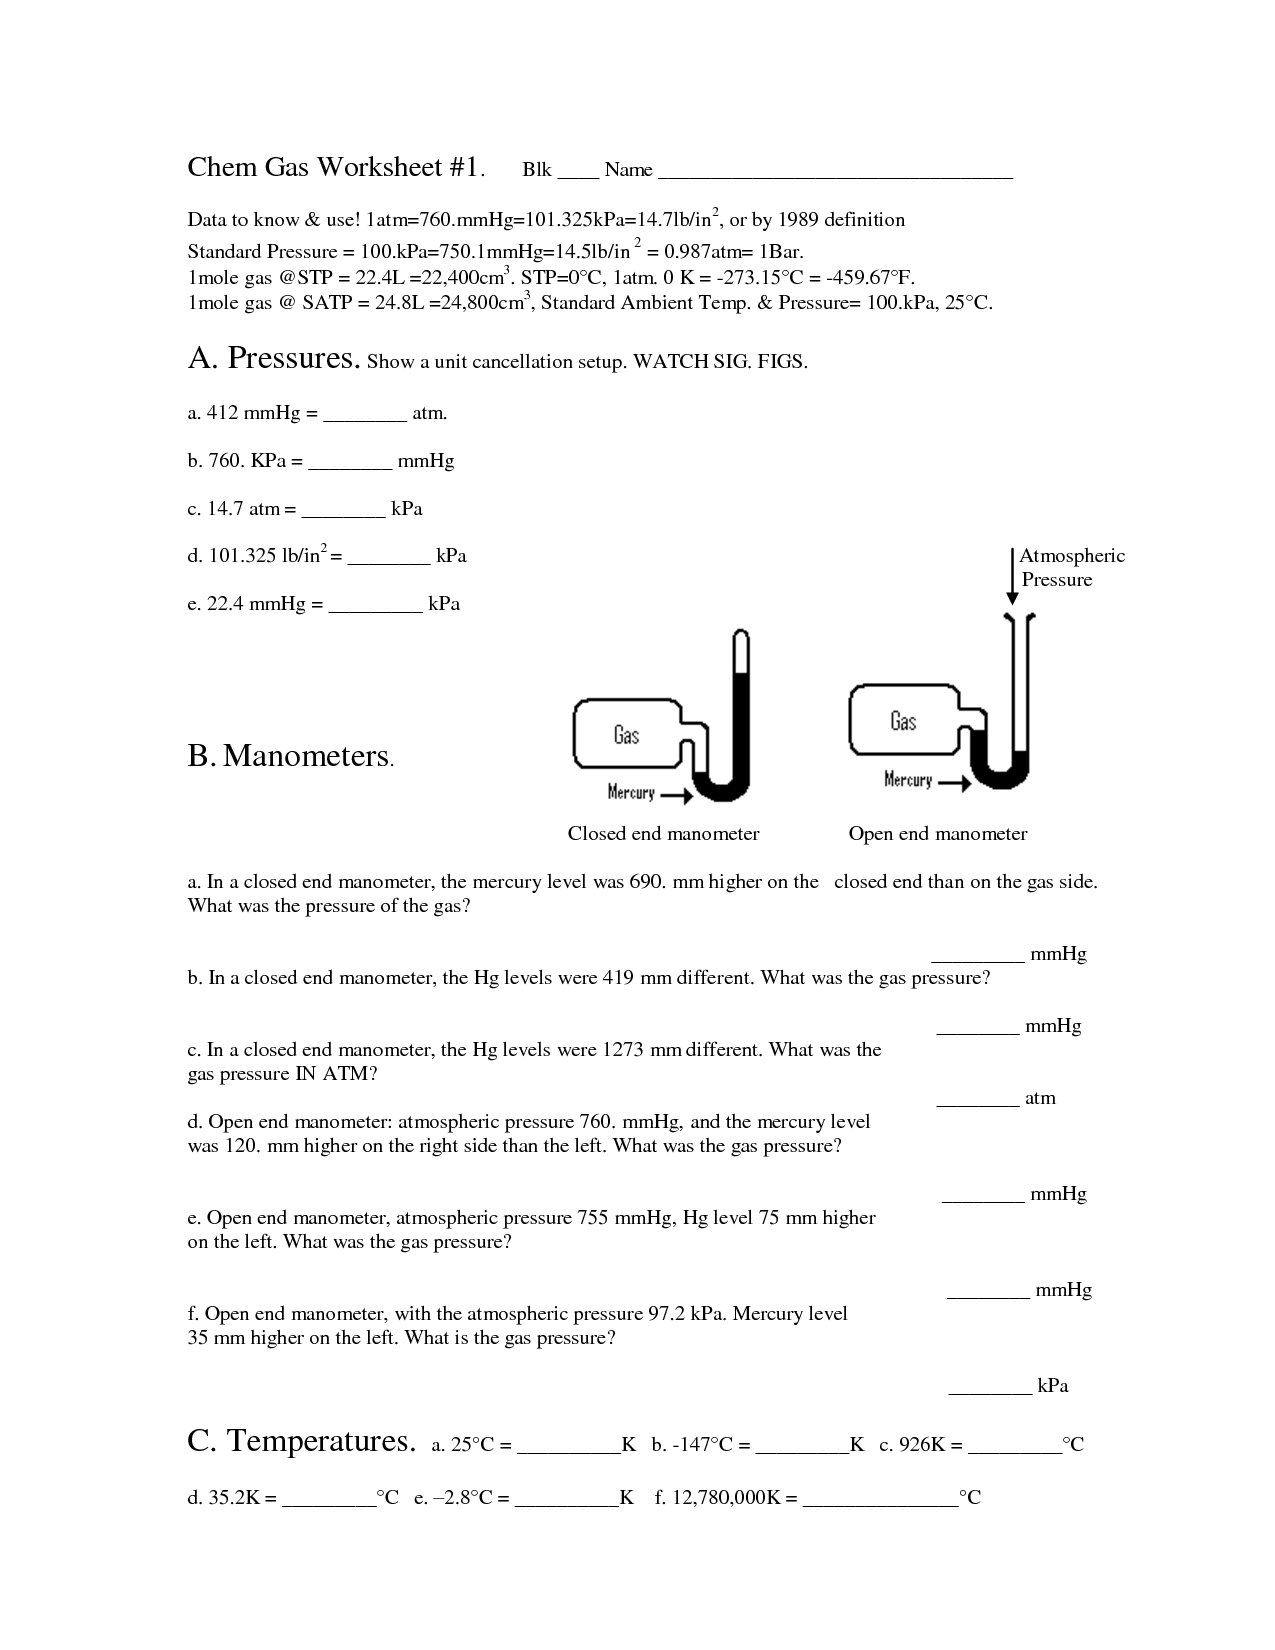 Combined Gas Law Worksheet Answers Image